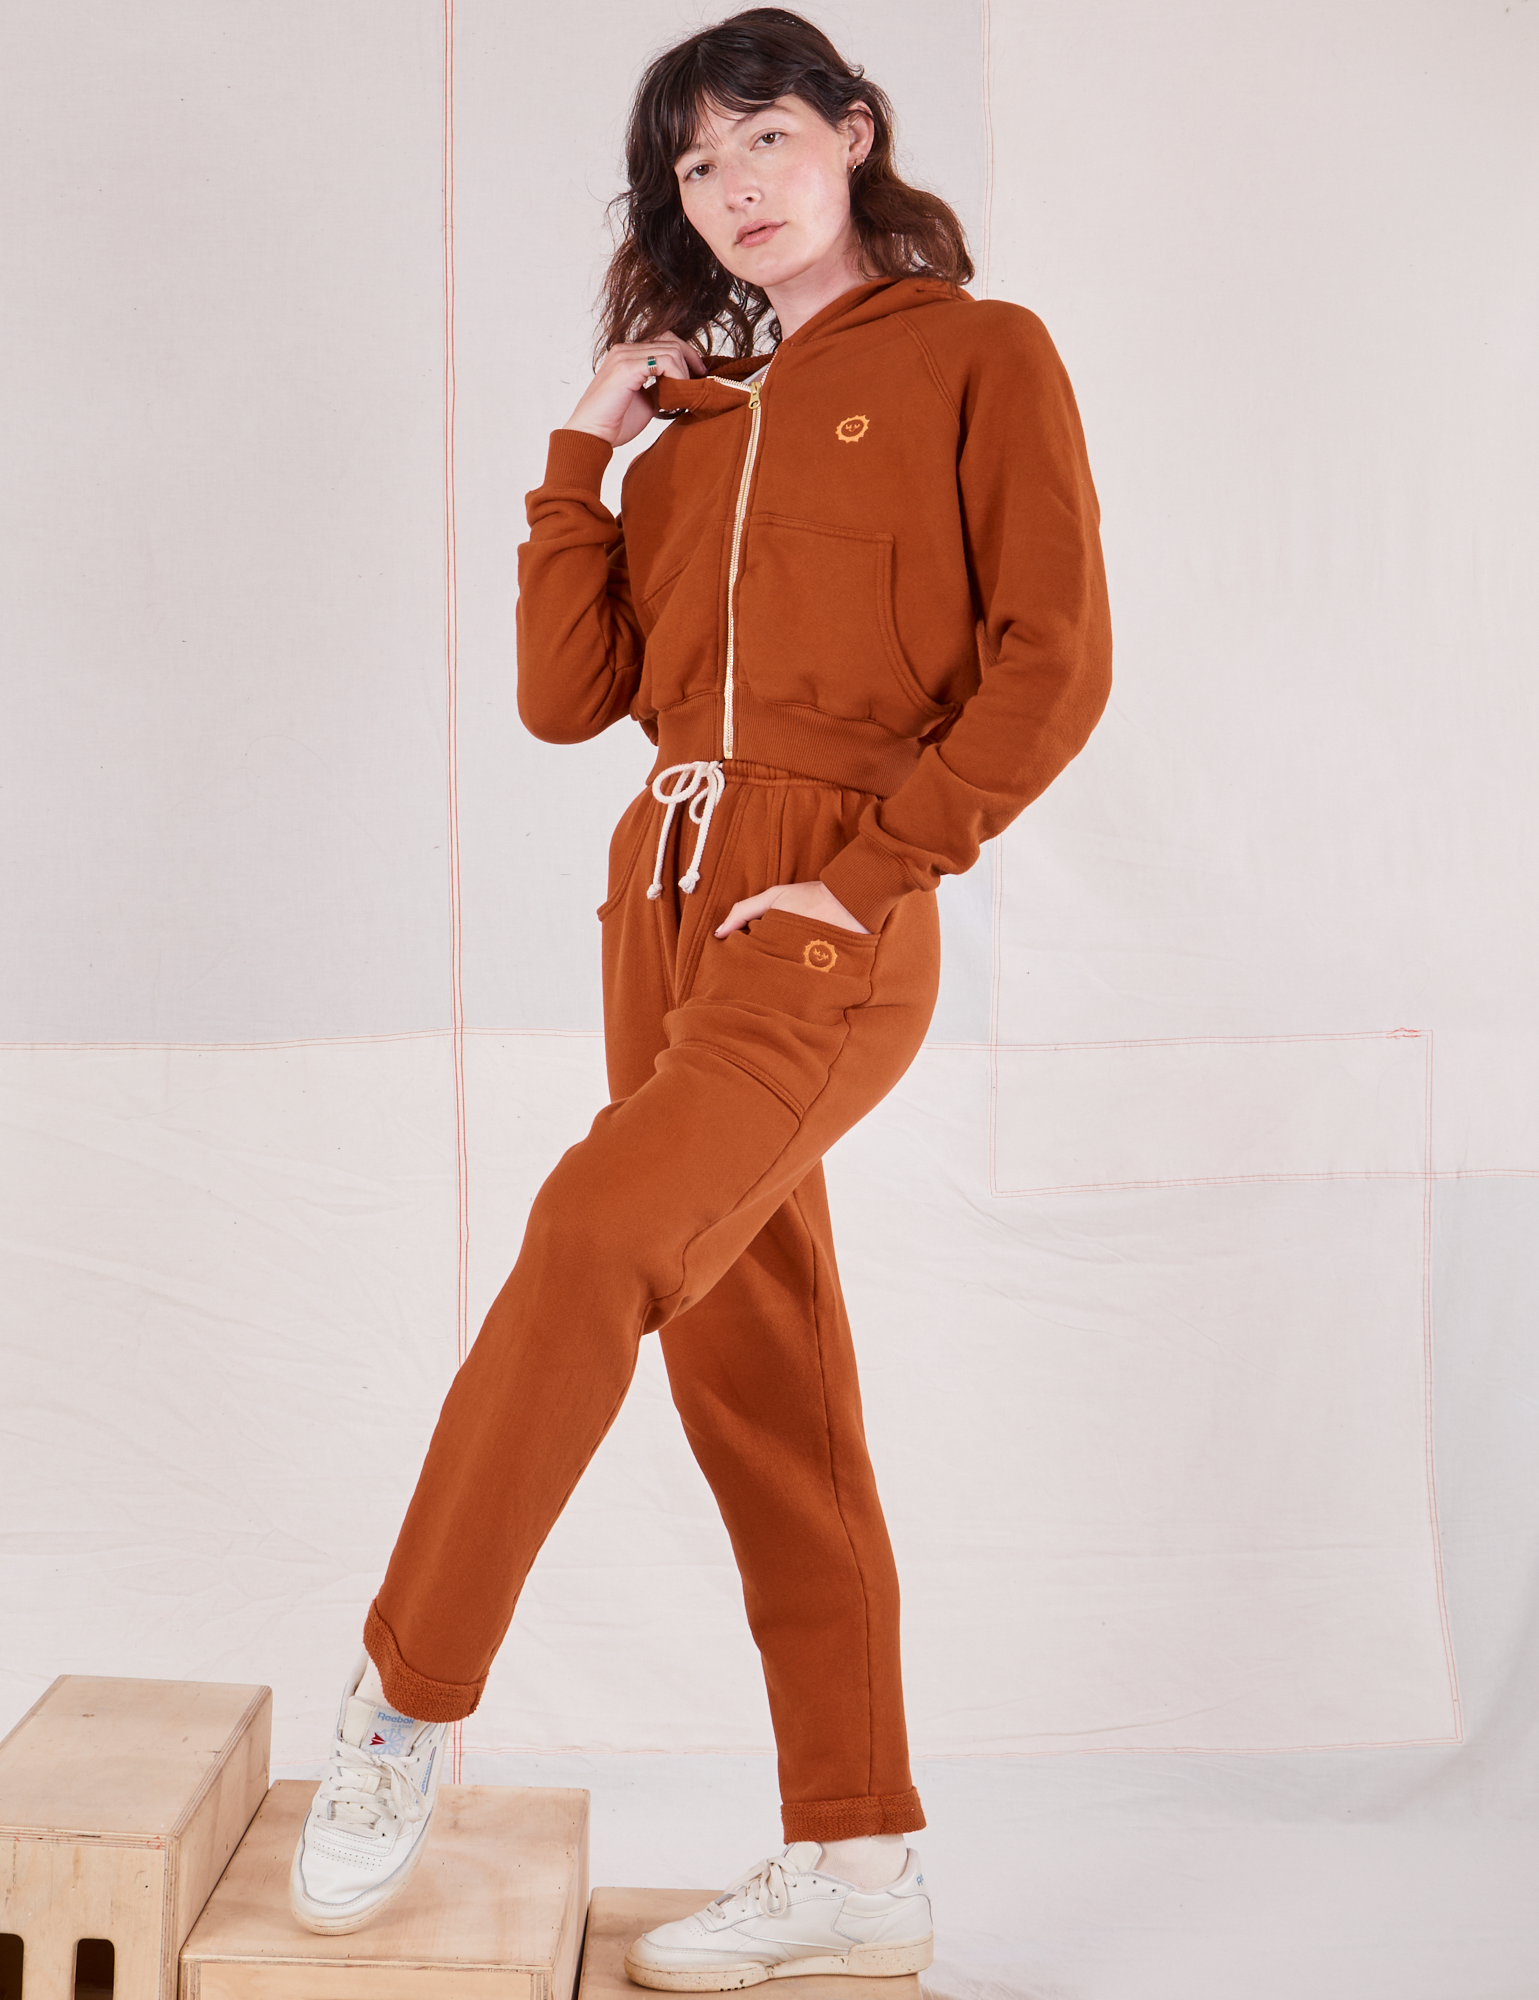 Alex is 5&#39;8&quot; and wearing P Cropped Zip Hoodie in Burnt Terracotta paired with matching Rolled Cuff Sweat Pants